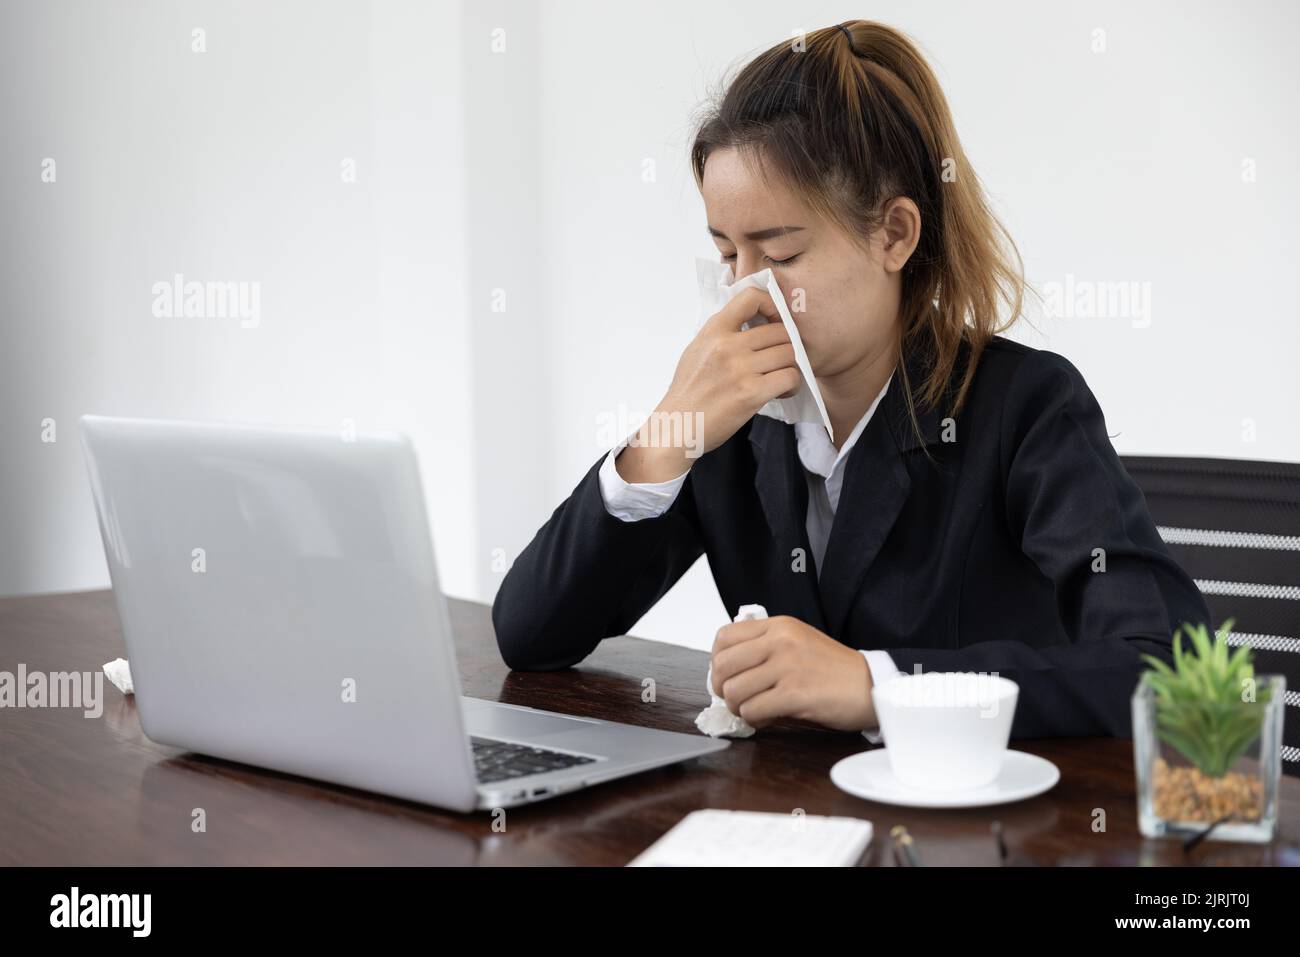 Tired asia business woman with headache at office, feeling sick at work, copy space Stock Photo